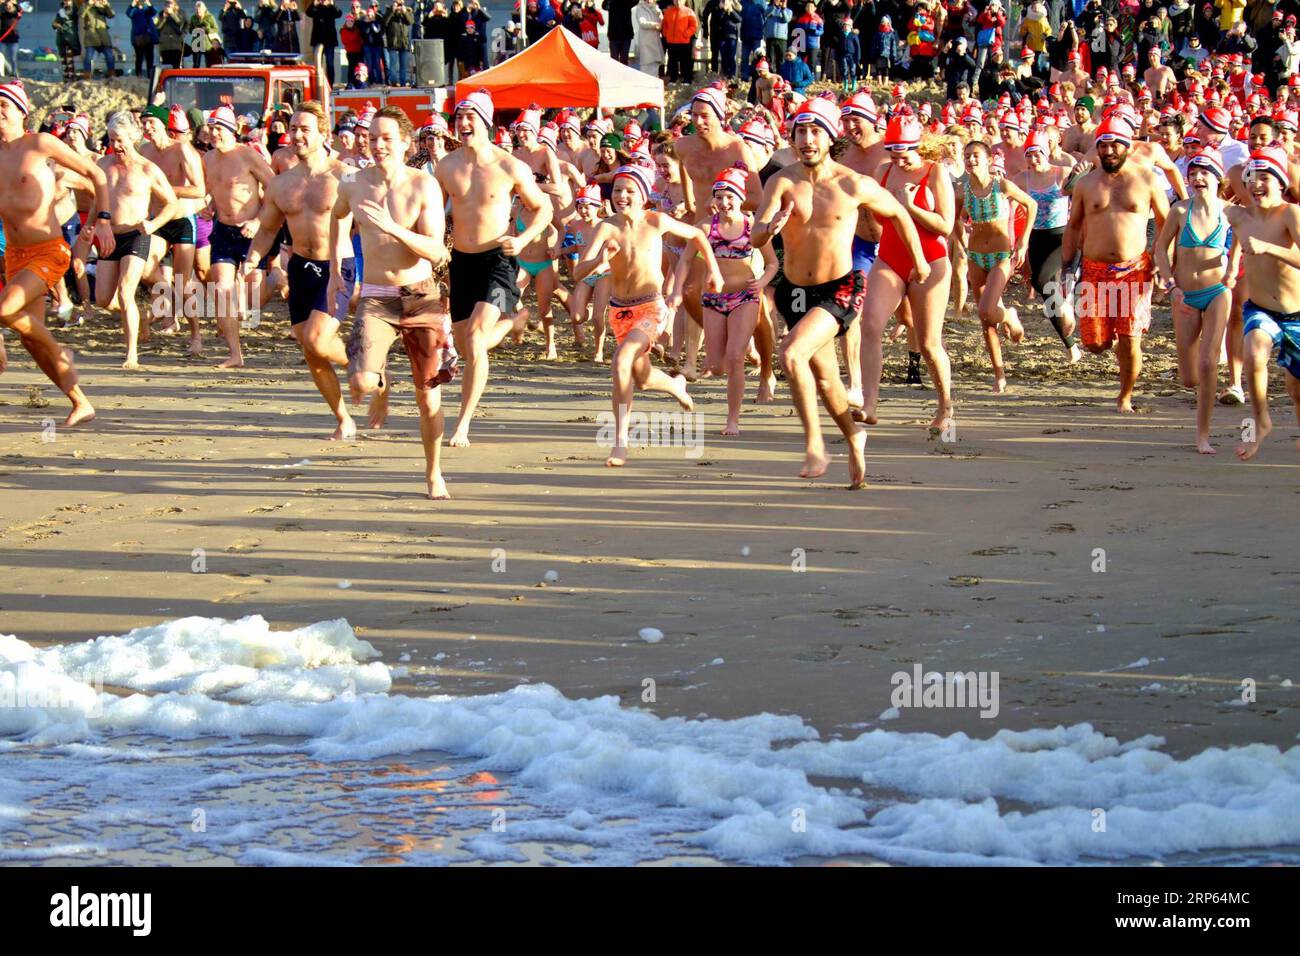 (190101) -- BLOEMENDAAL AAN ZEE (THE NETHERLANDS), Jan. 1, 2019 -- People swarm into the sea during a traditional New Year s Dip event to celebrate the beginning of the New Year in Bloemendaal aan Zee, the Netherlands, on Jan. 1, 2019. ) THE NETHERLANDS-BLOEMENDAAL AAN ZEE-NEW YEAR-CELEBRATION SylviaxLederer PUBLICATIONxNOTxINxCHN Stock Photo